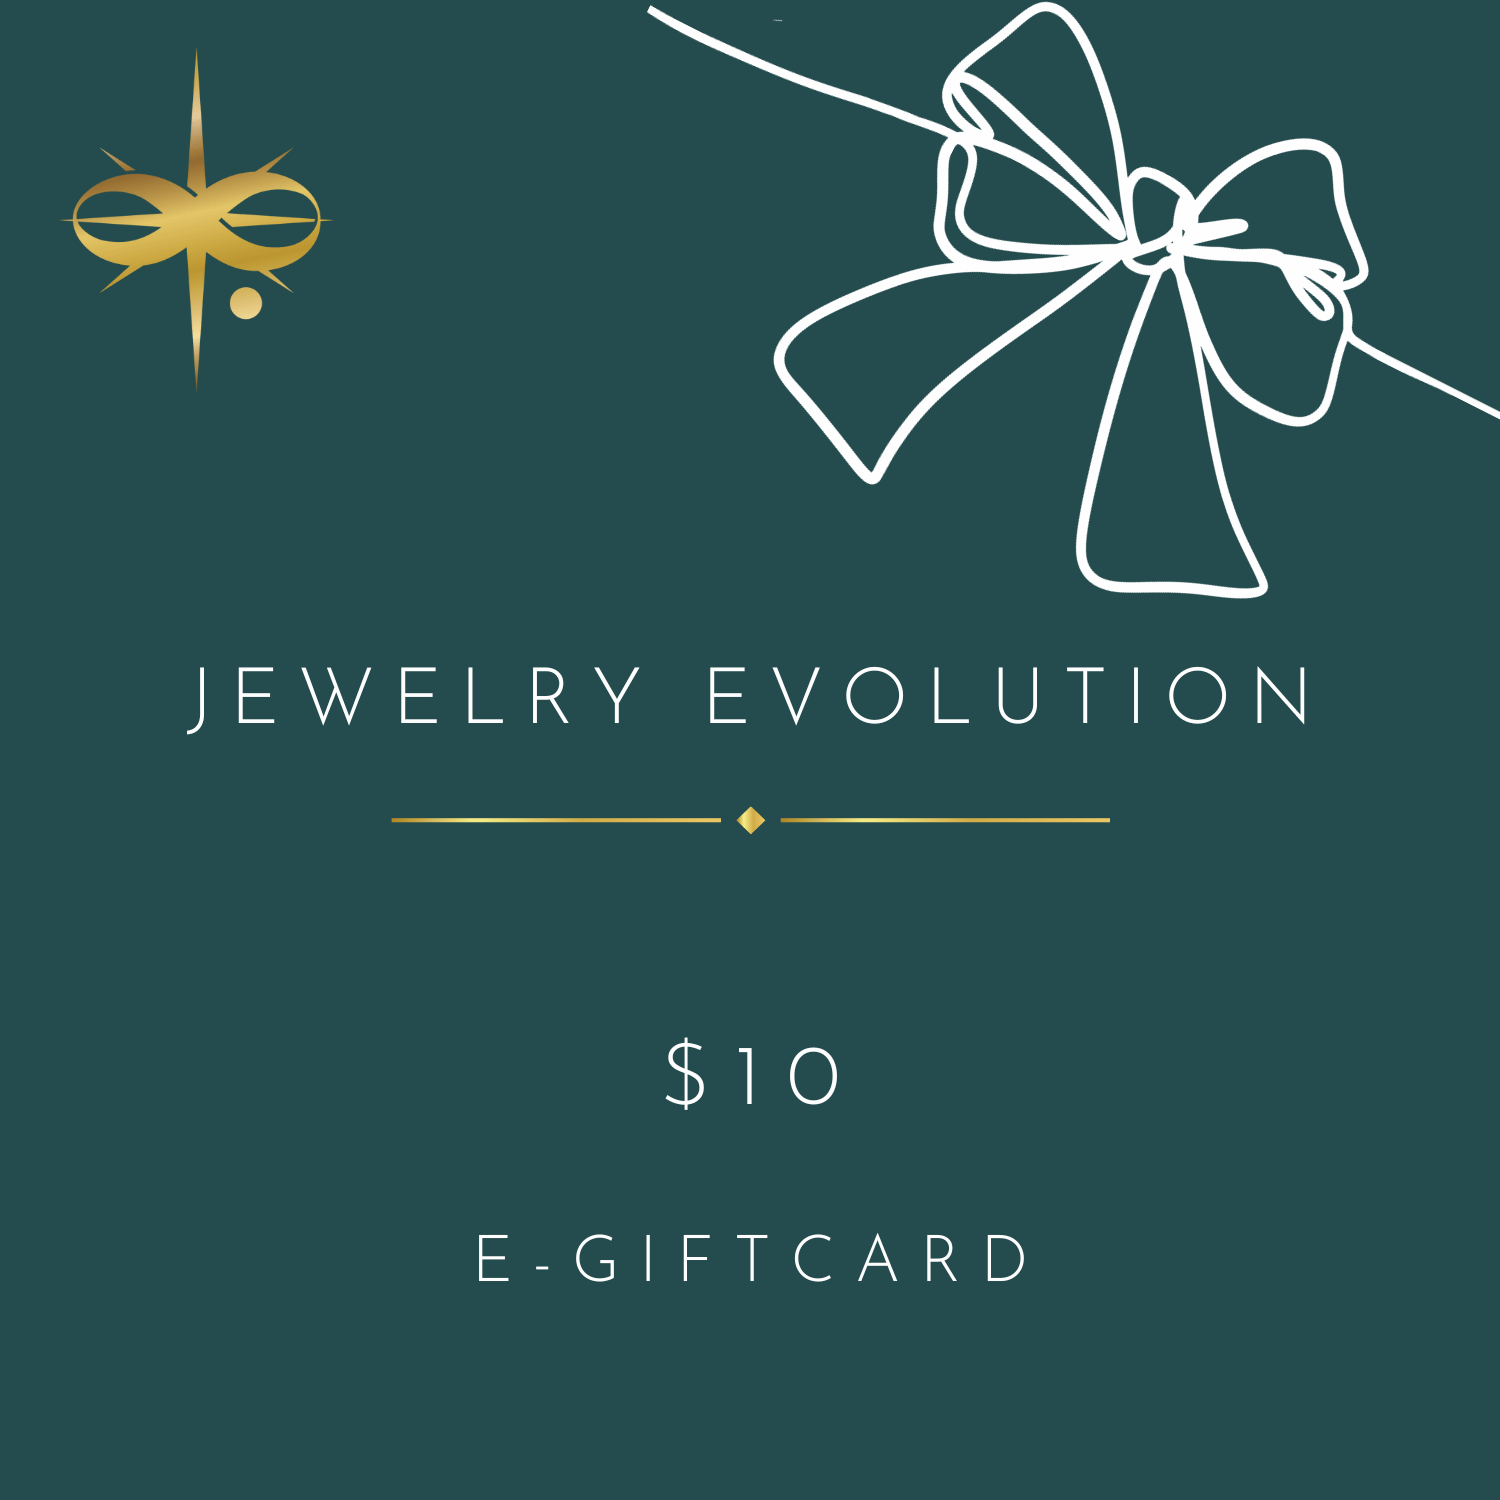 Jewelry Evolution Gift Card $10.00 Gift Card